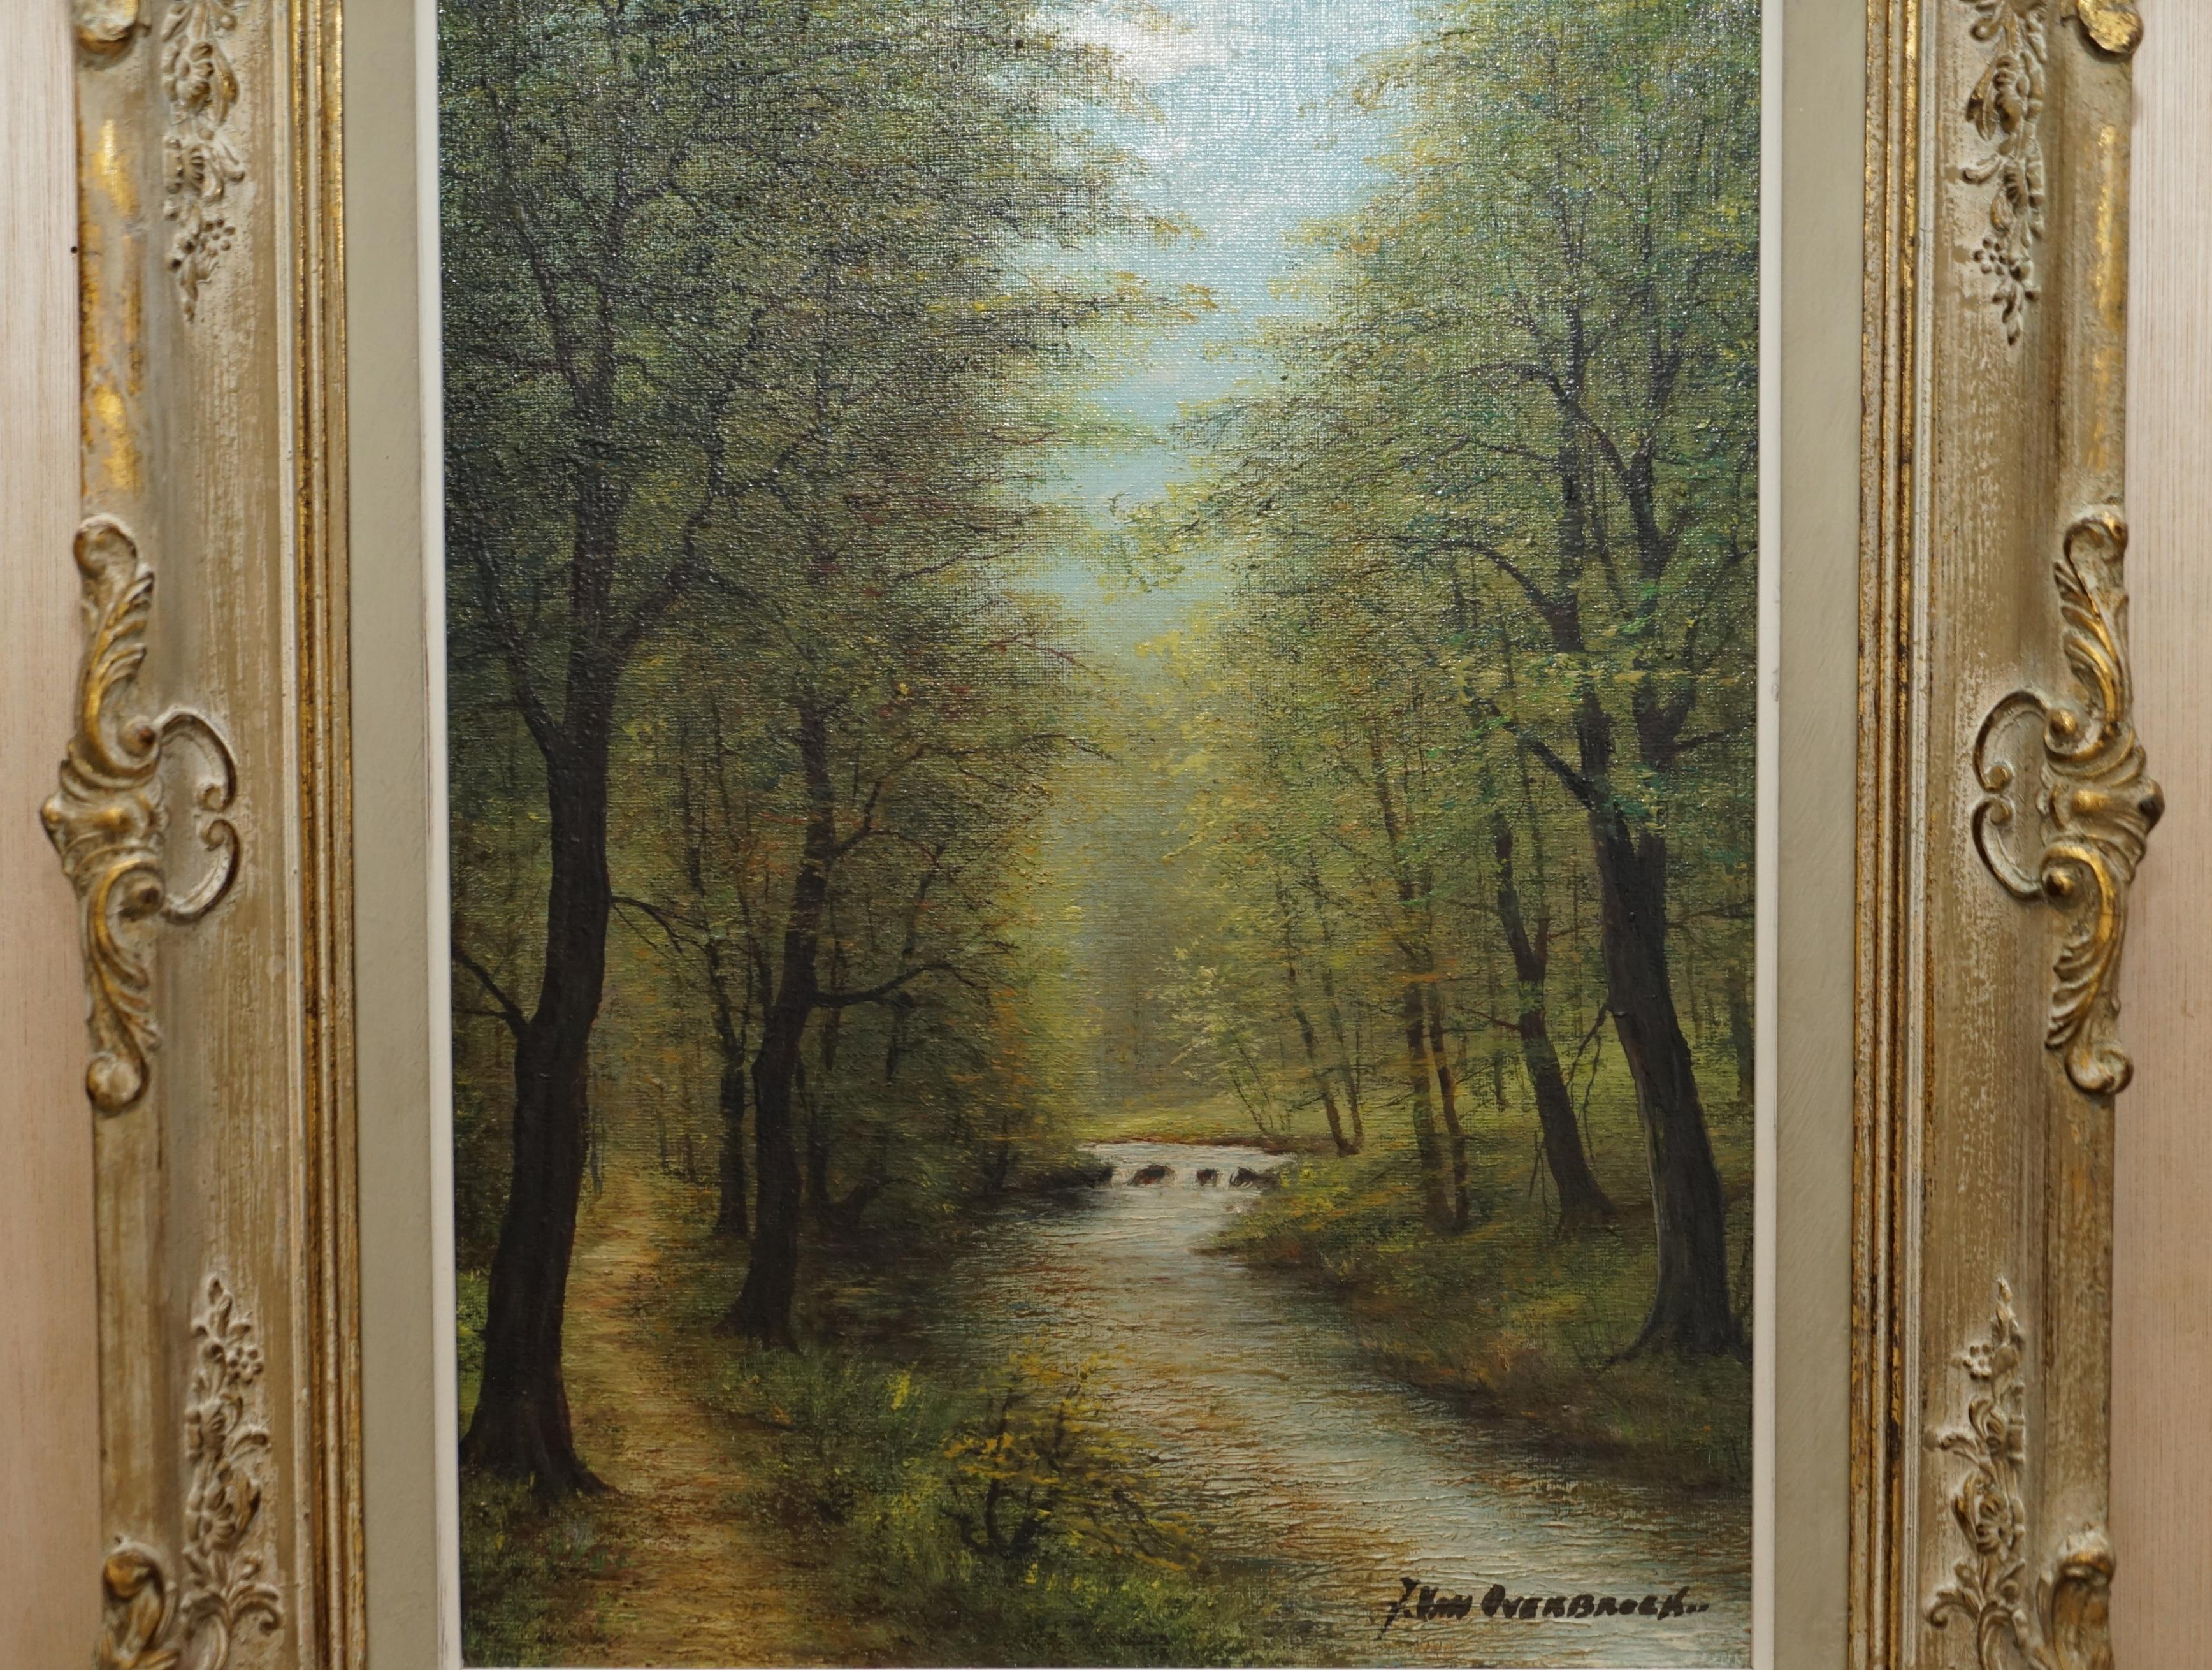 We are delighted to offer for sale this stunning original late 19th century Flemish oil painting, signed Van Overbroek depicting a nice nature scene.

A very good looking and decorative painting, the scene depicts very serene looking tress and a